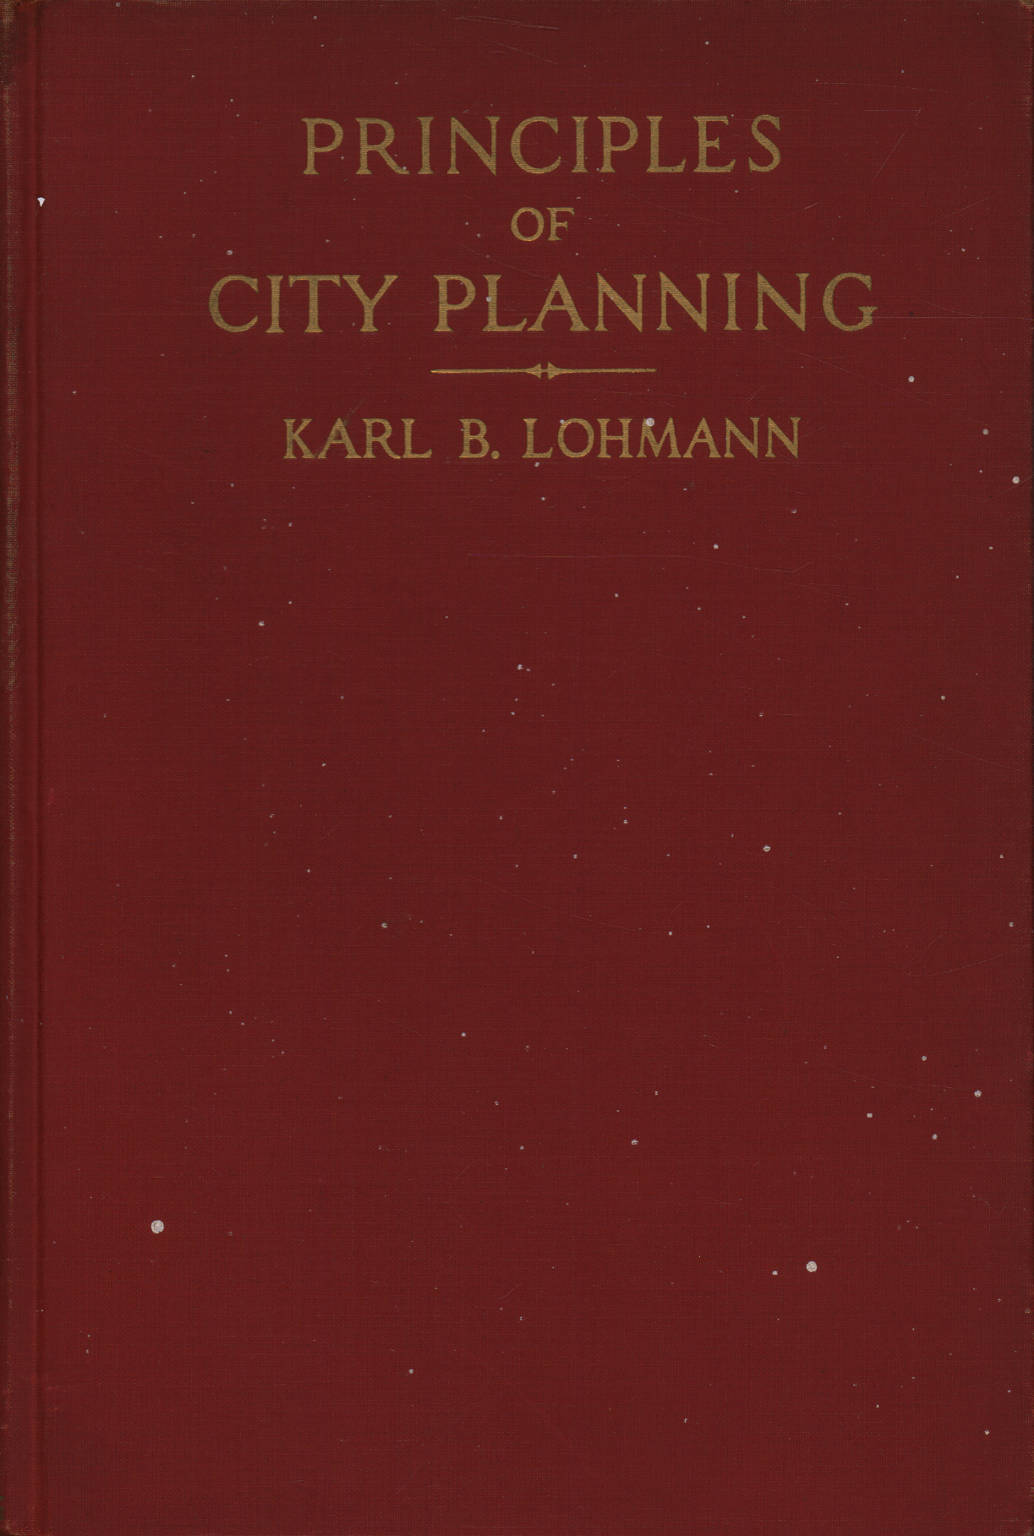 Principles of City Planning, s.a.